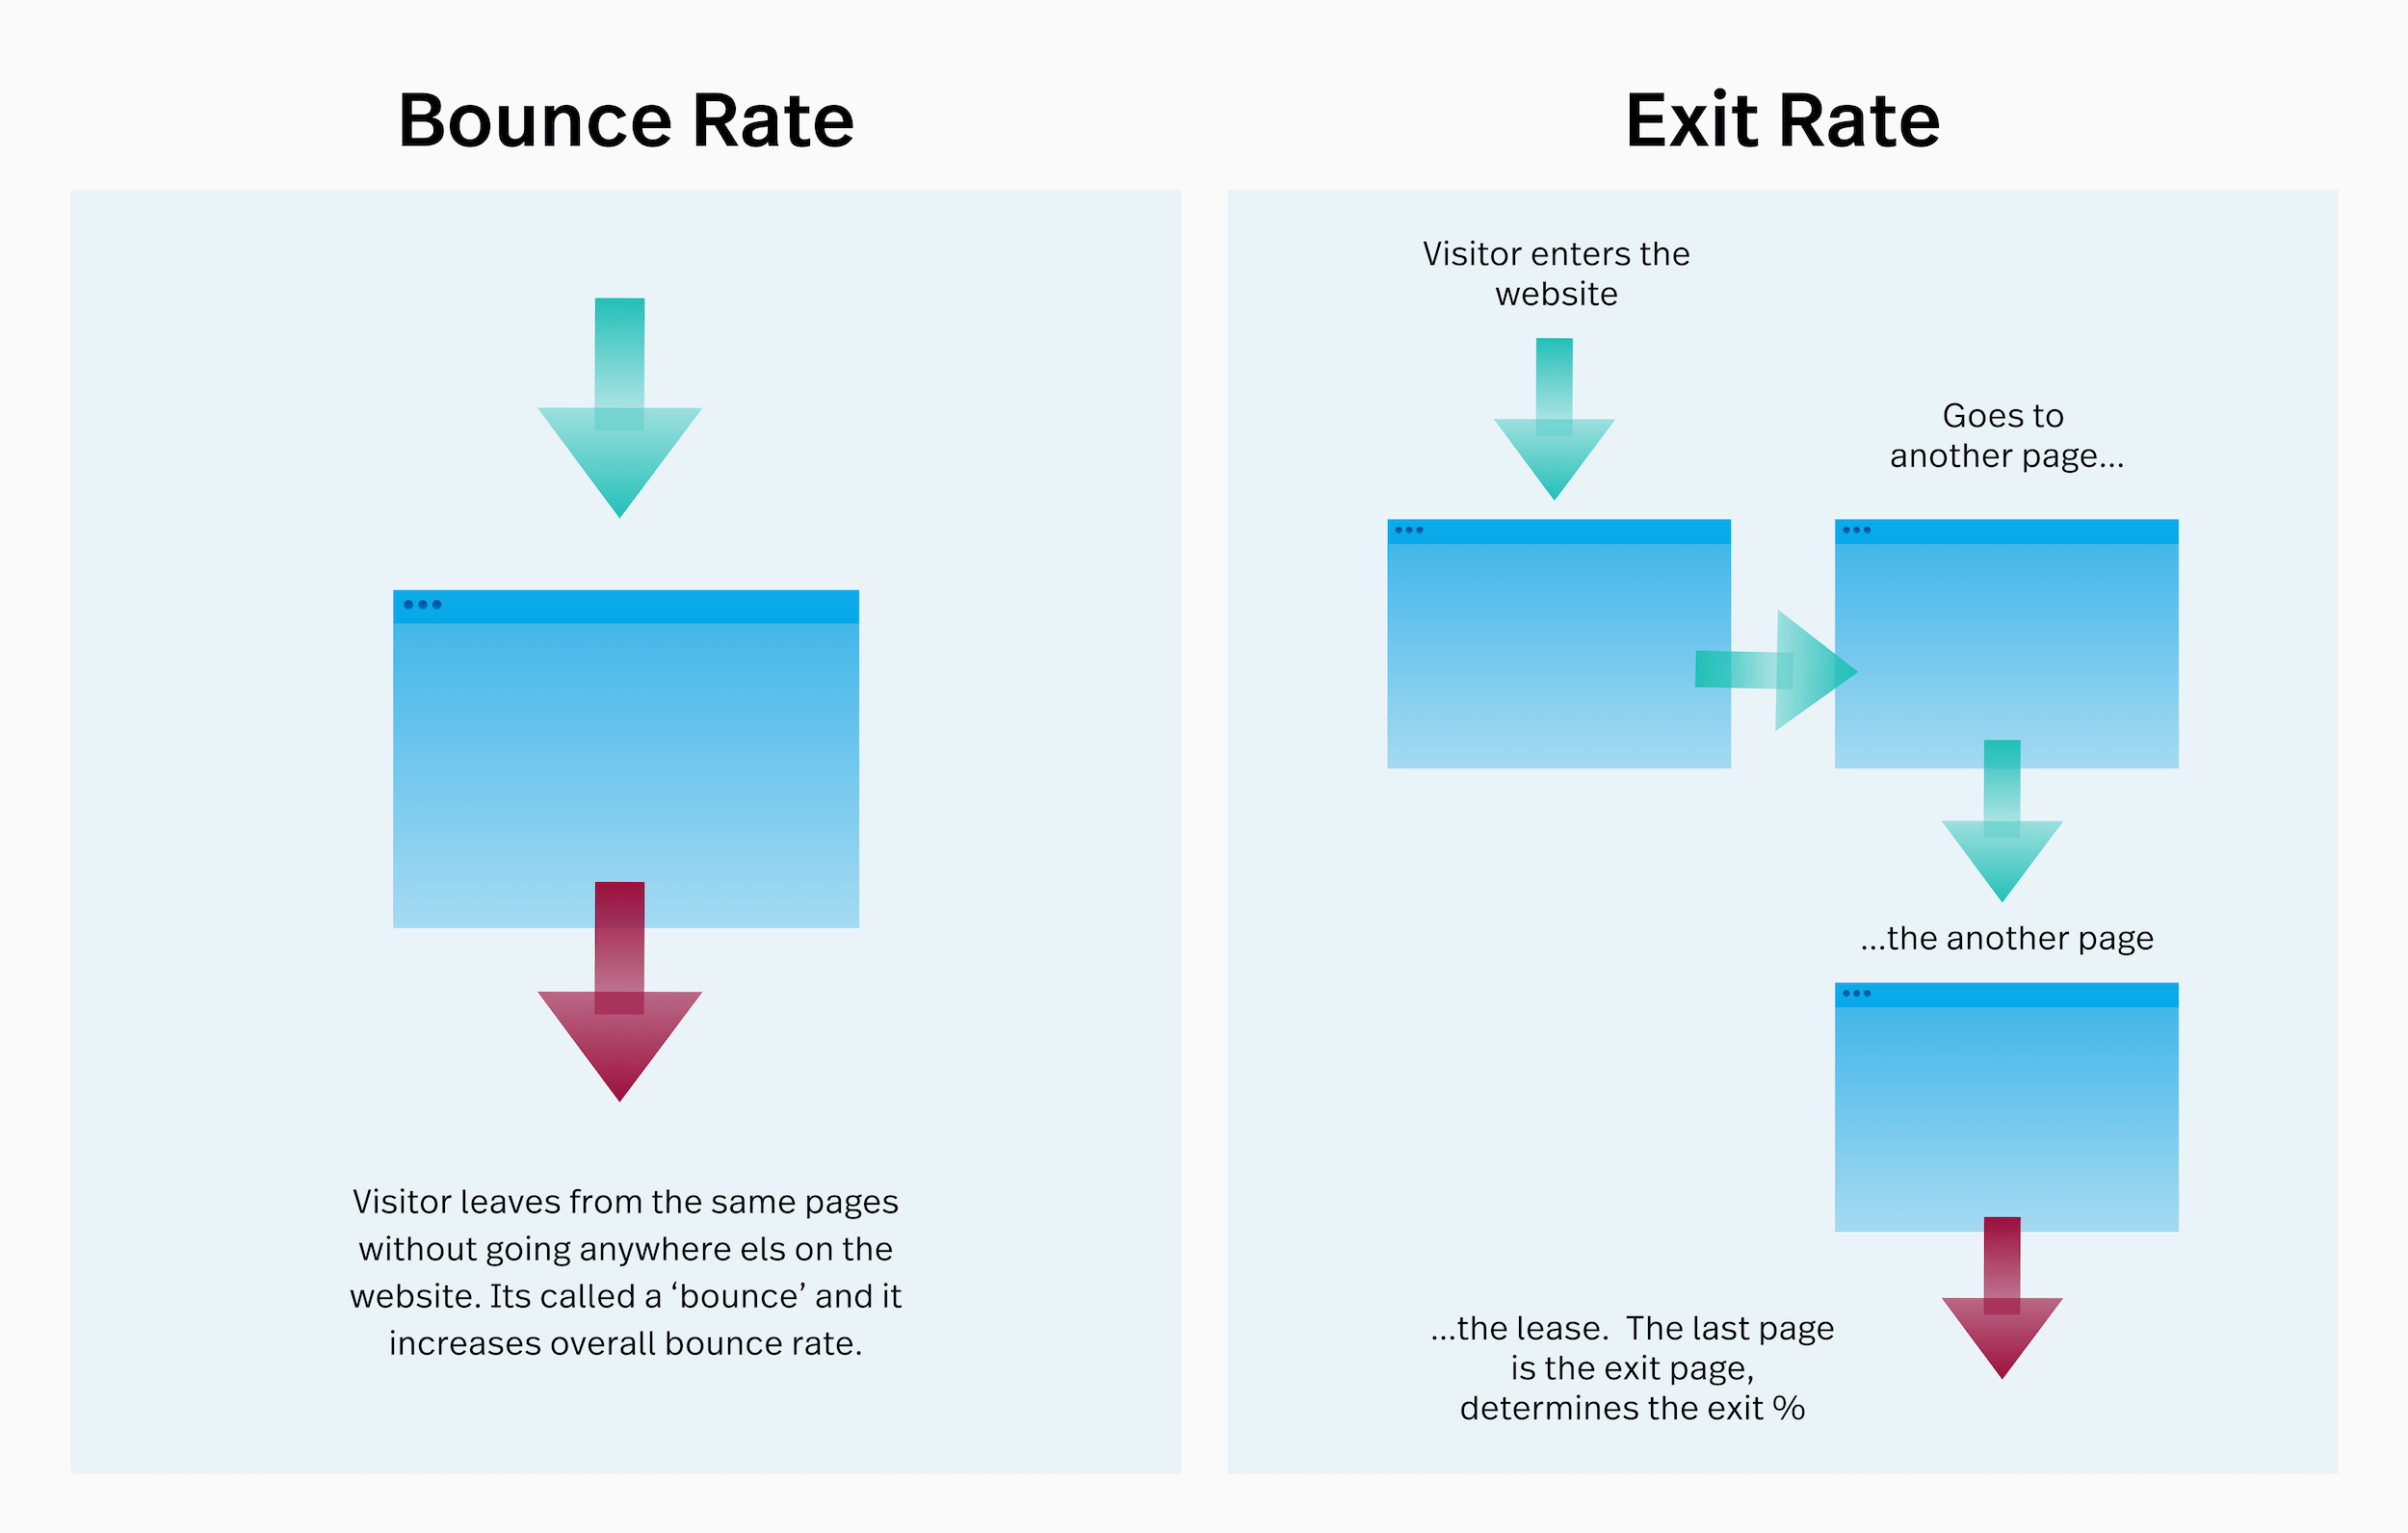 Exit rate vs bounce rate